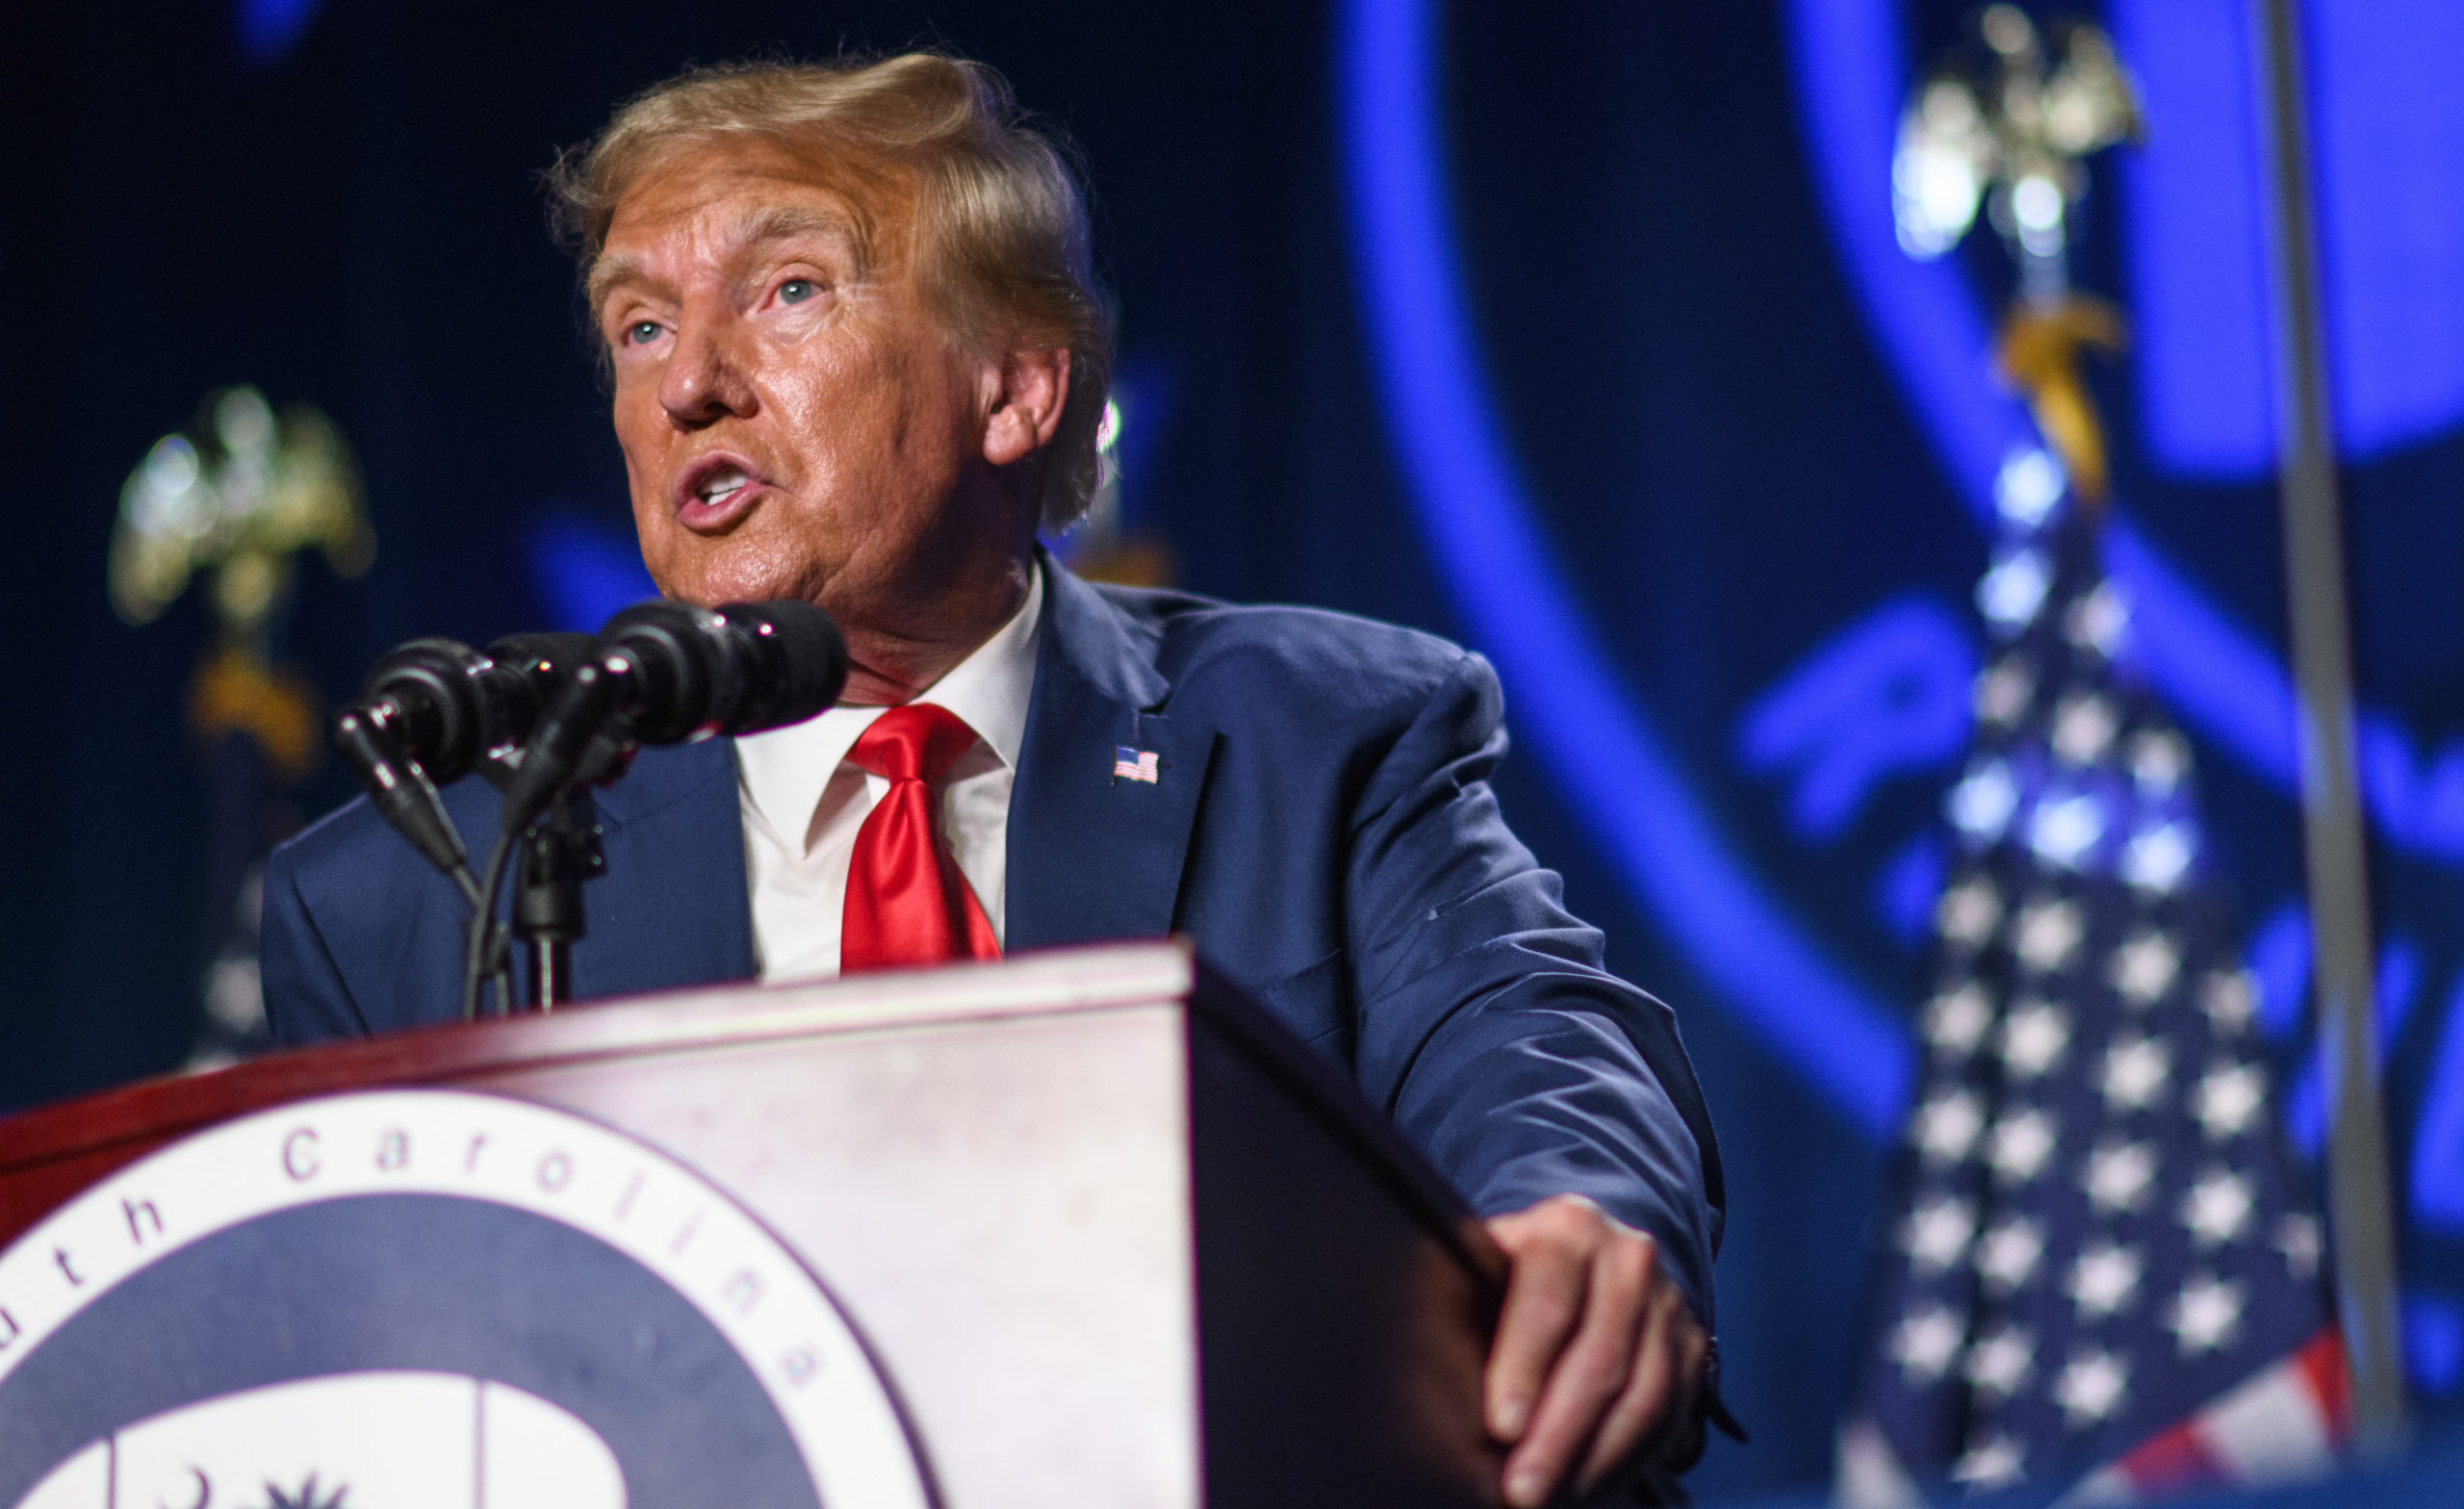 COLUMBIA, SC - AUGUST 5: Former President Donald Trump speaks as a keynote speaker at the 56th Annual Silver Elephant Dinner hosted by the Republican Party of South Carolina on August 5, 2023 in Columbia, SC. President Trump was introduced by South Carolina Gov. Henry McMaster.  (Photo Credit: Melissa Sue Geritz/Getty Images)